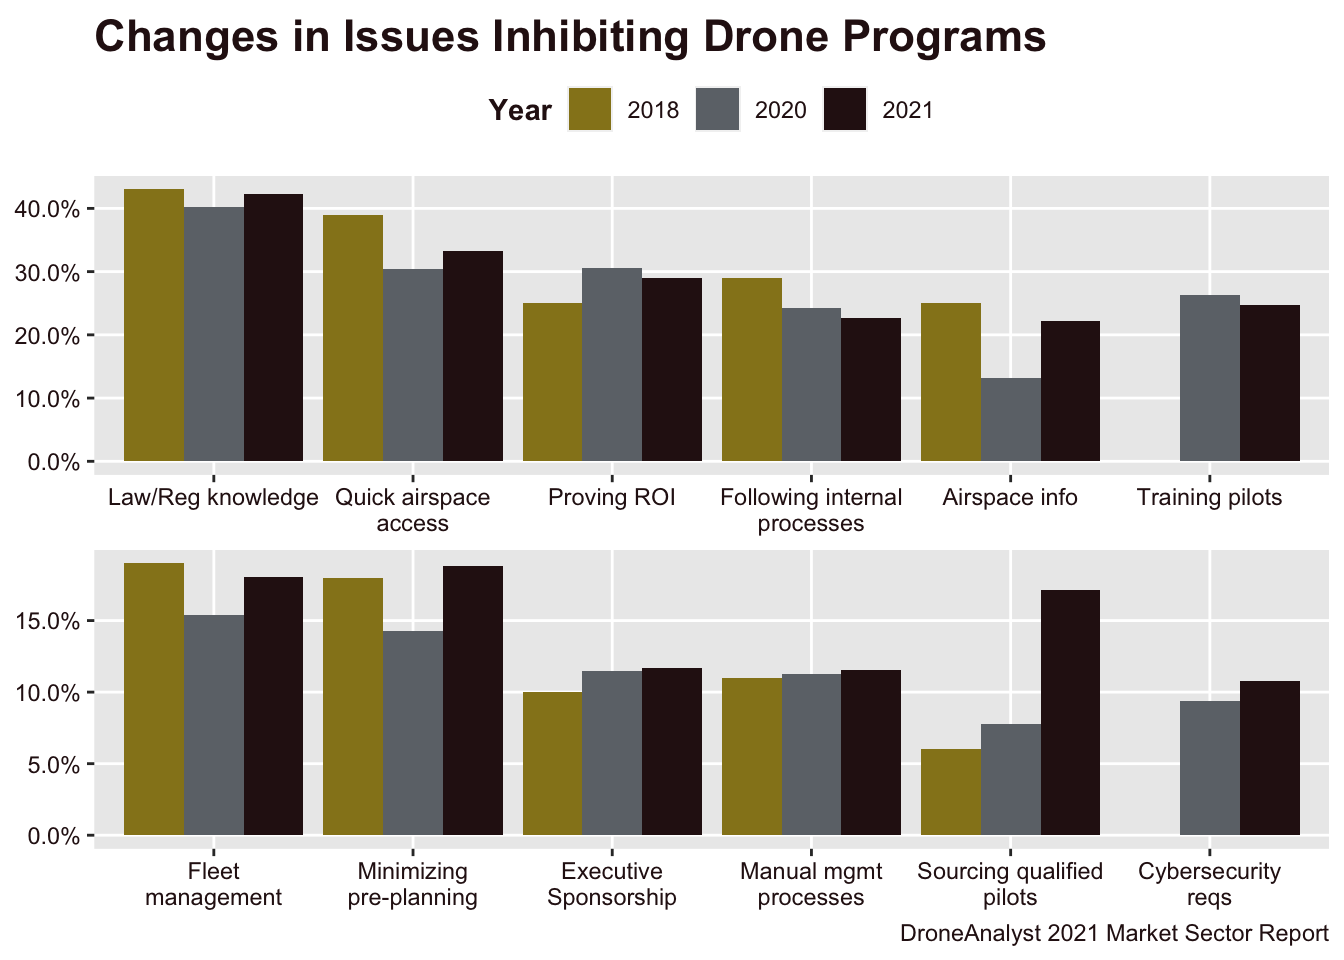 Changes in Issues Inhibiting Drone Programs (Business & Agency Users)